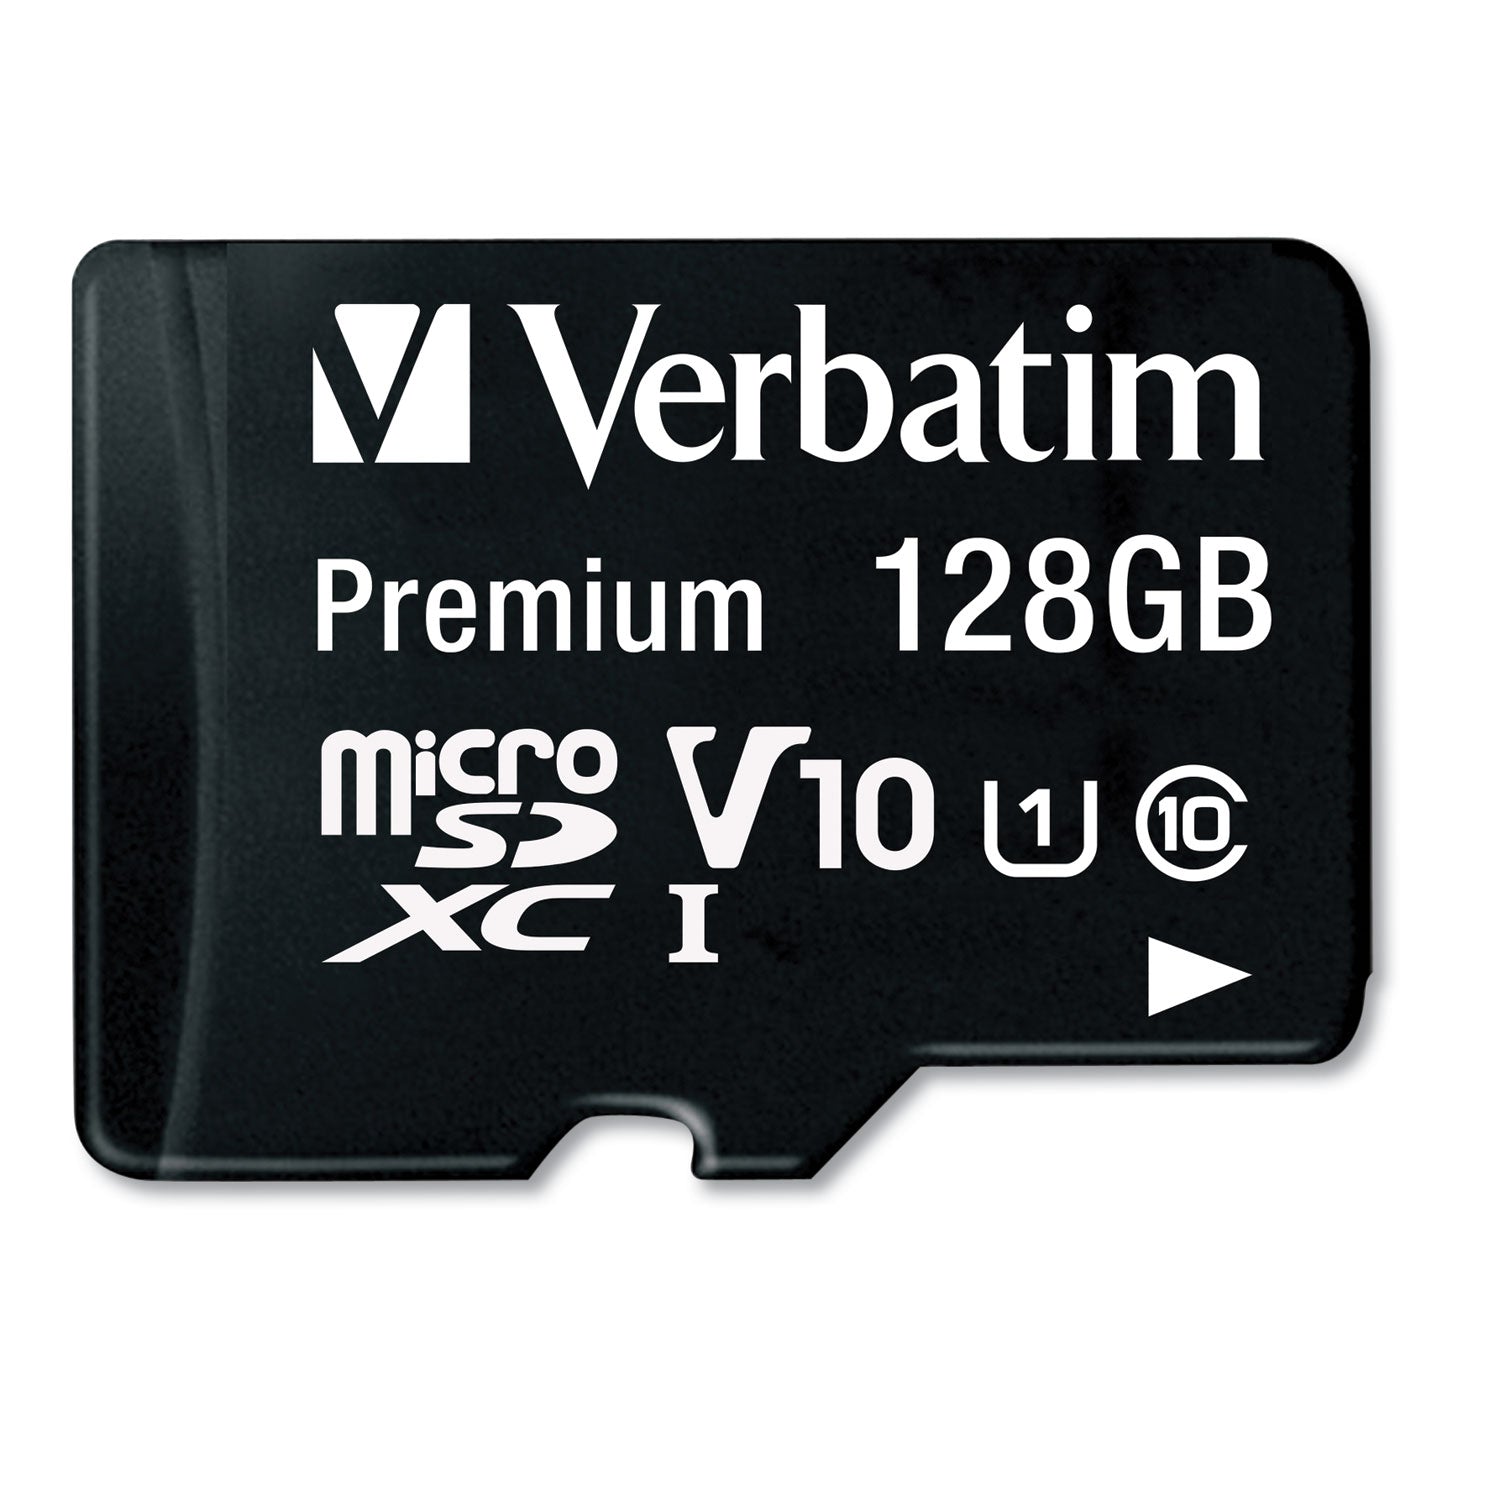 128gb-premium-microsdxc-memory-card-with-adapter-uhs-i-v10-u1-class-10-up-to-90mb-s-read-speed_ver44085 - 2